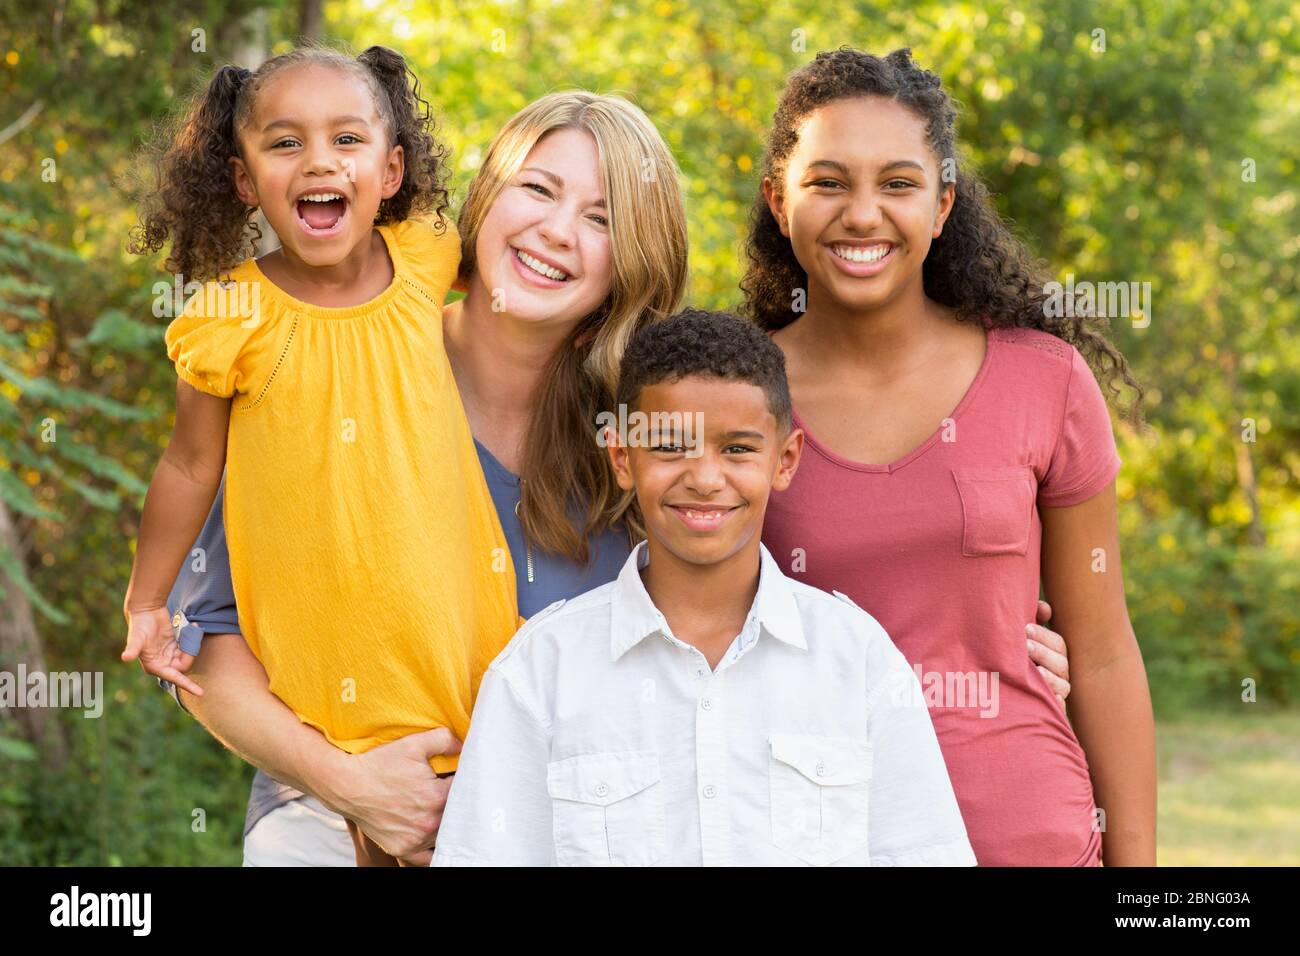 Portrait of a happy mixed race family smiling Stock Photo